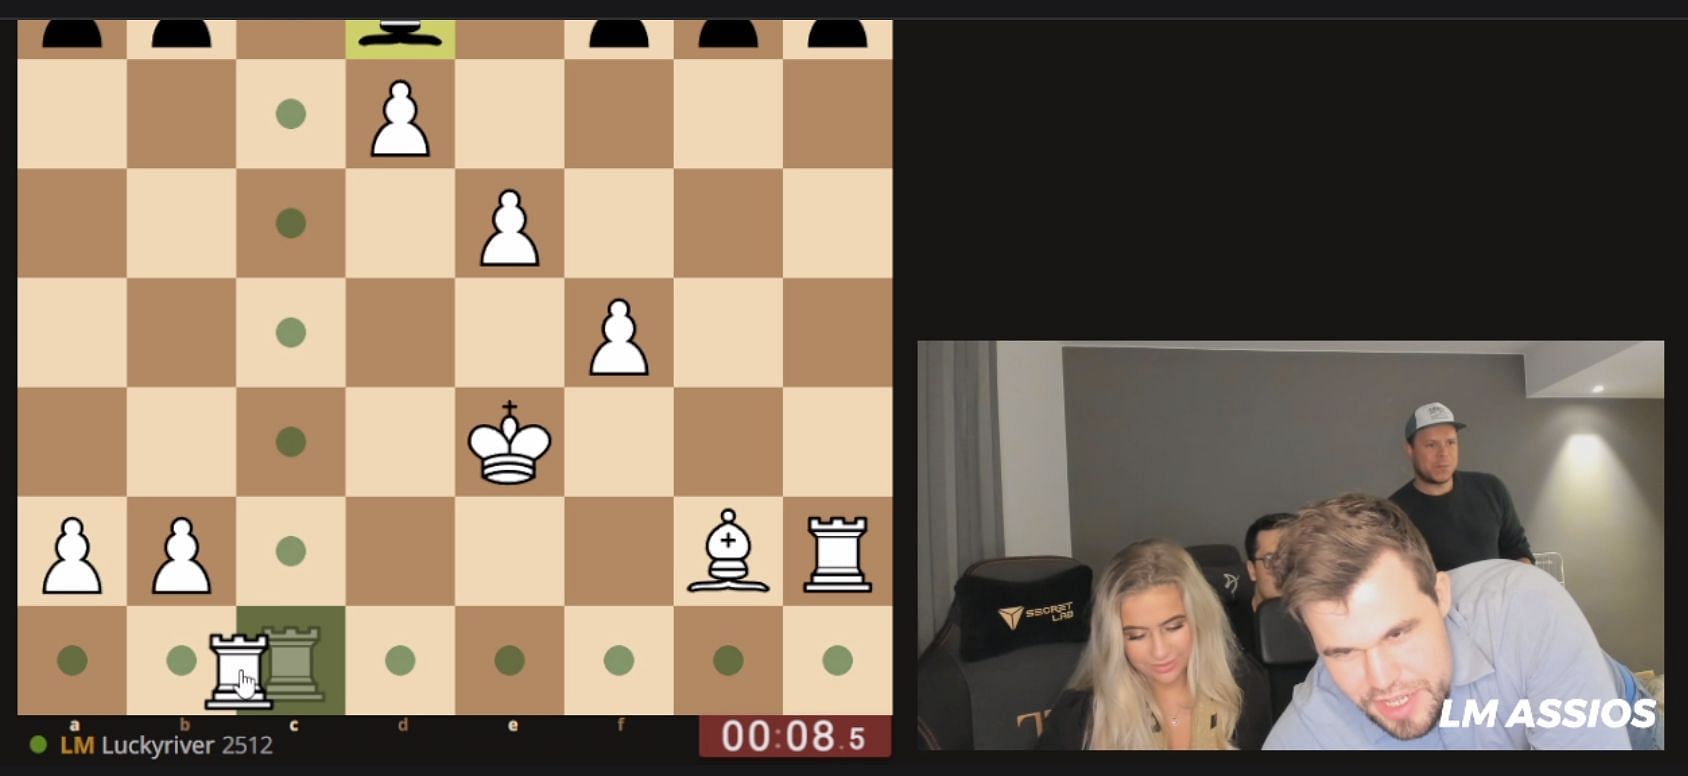 Magnus Carlsen took over a chess game and won it within a minute while he was drunk (Image via Assios/Twitch)